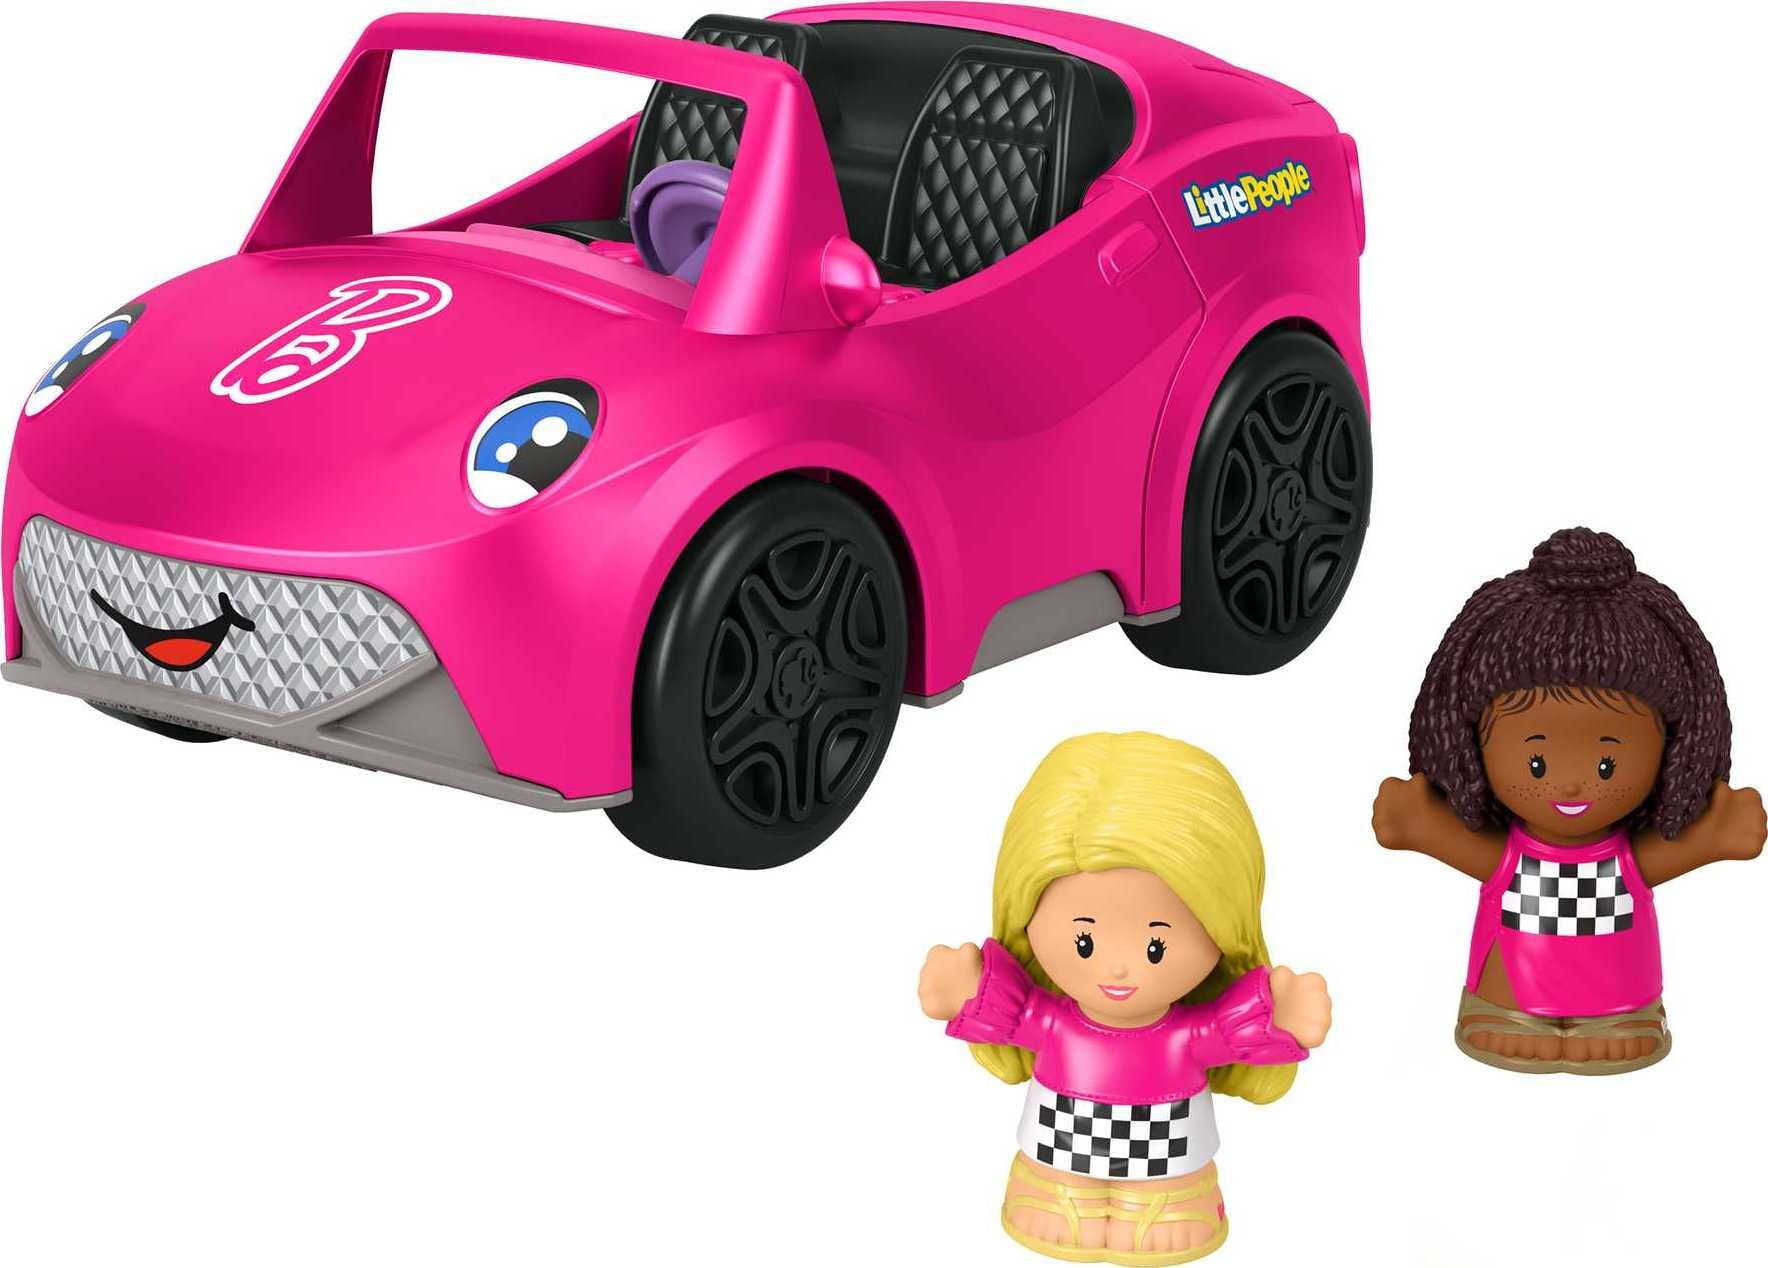 Fisher-Price Little People Barbie Convertible Toy Car with Music Sounds & 2 Figures for Toddlers